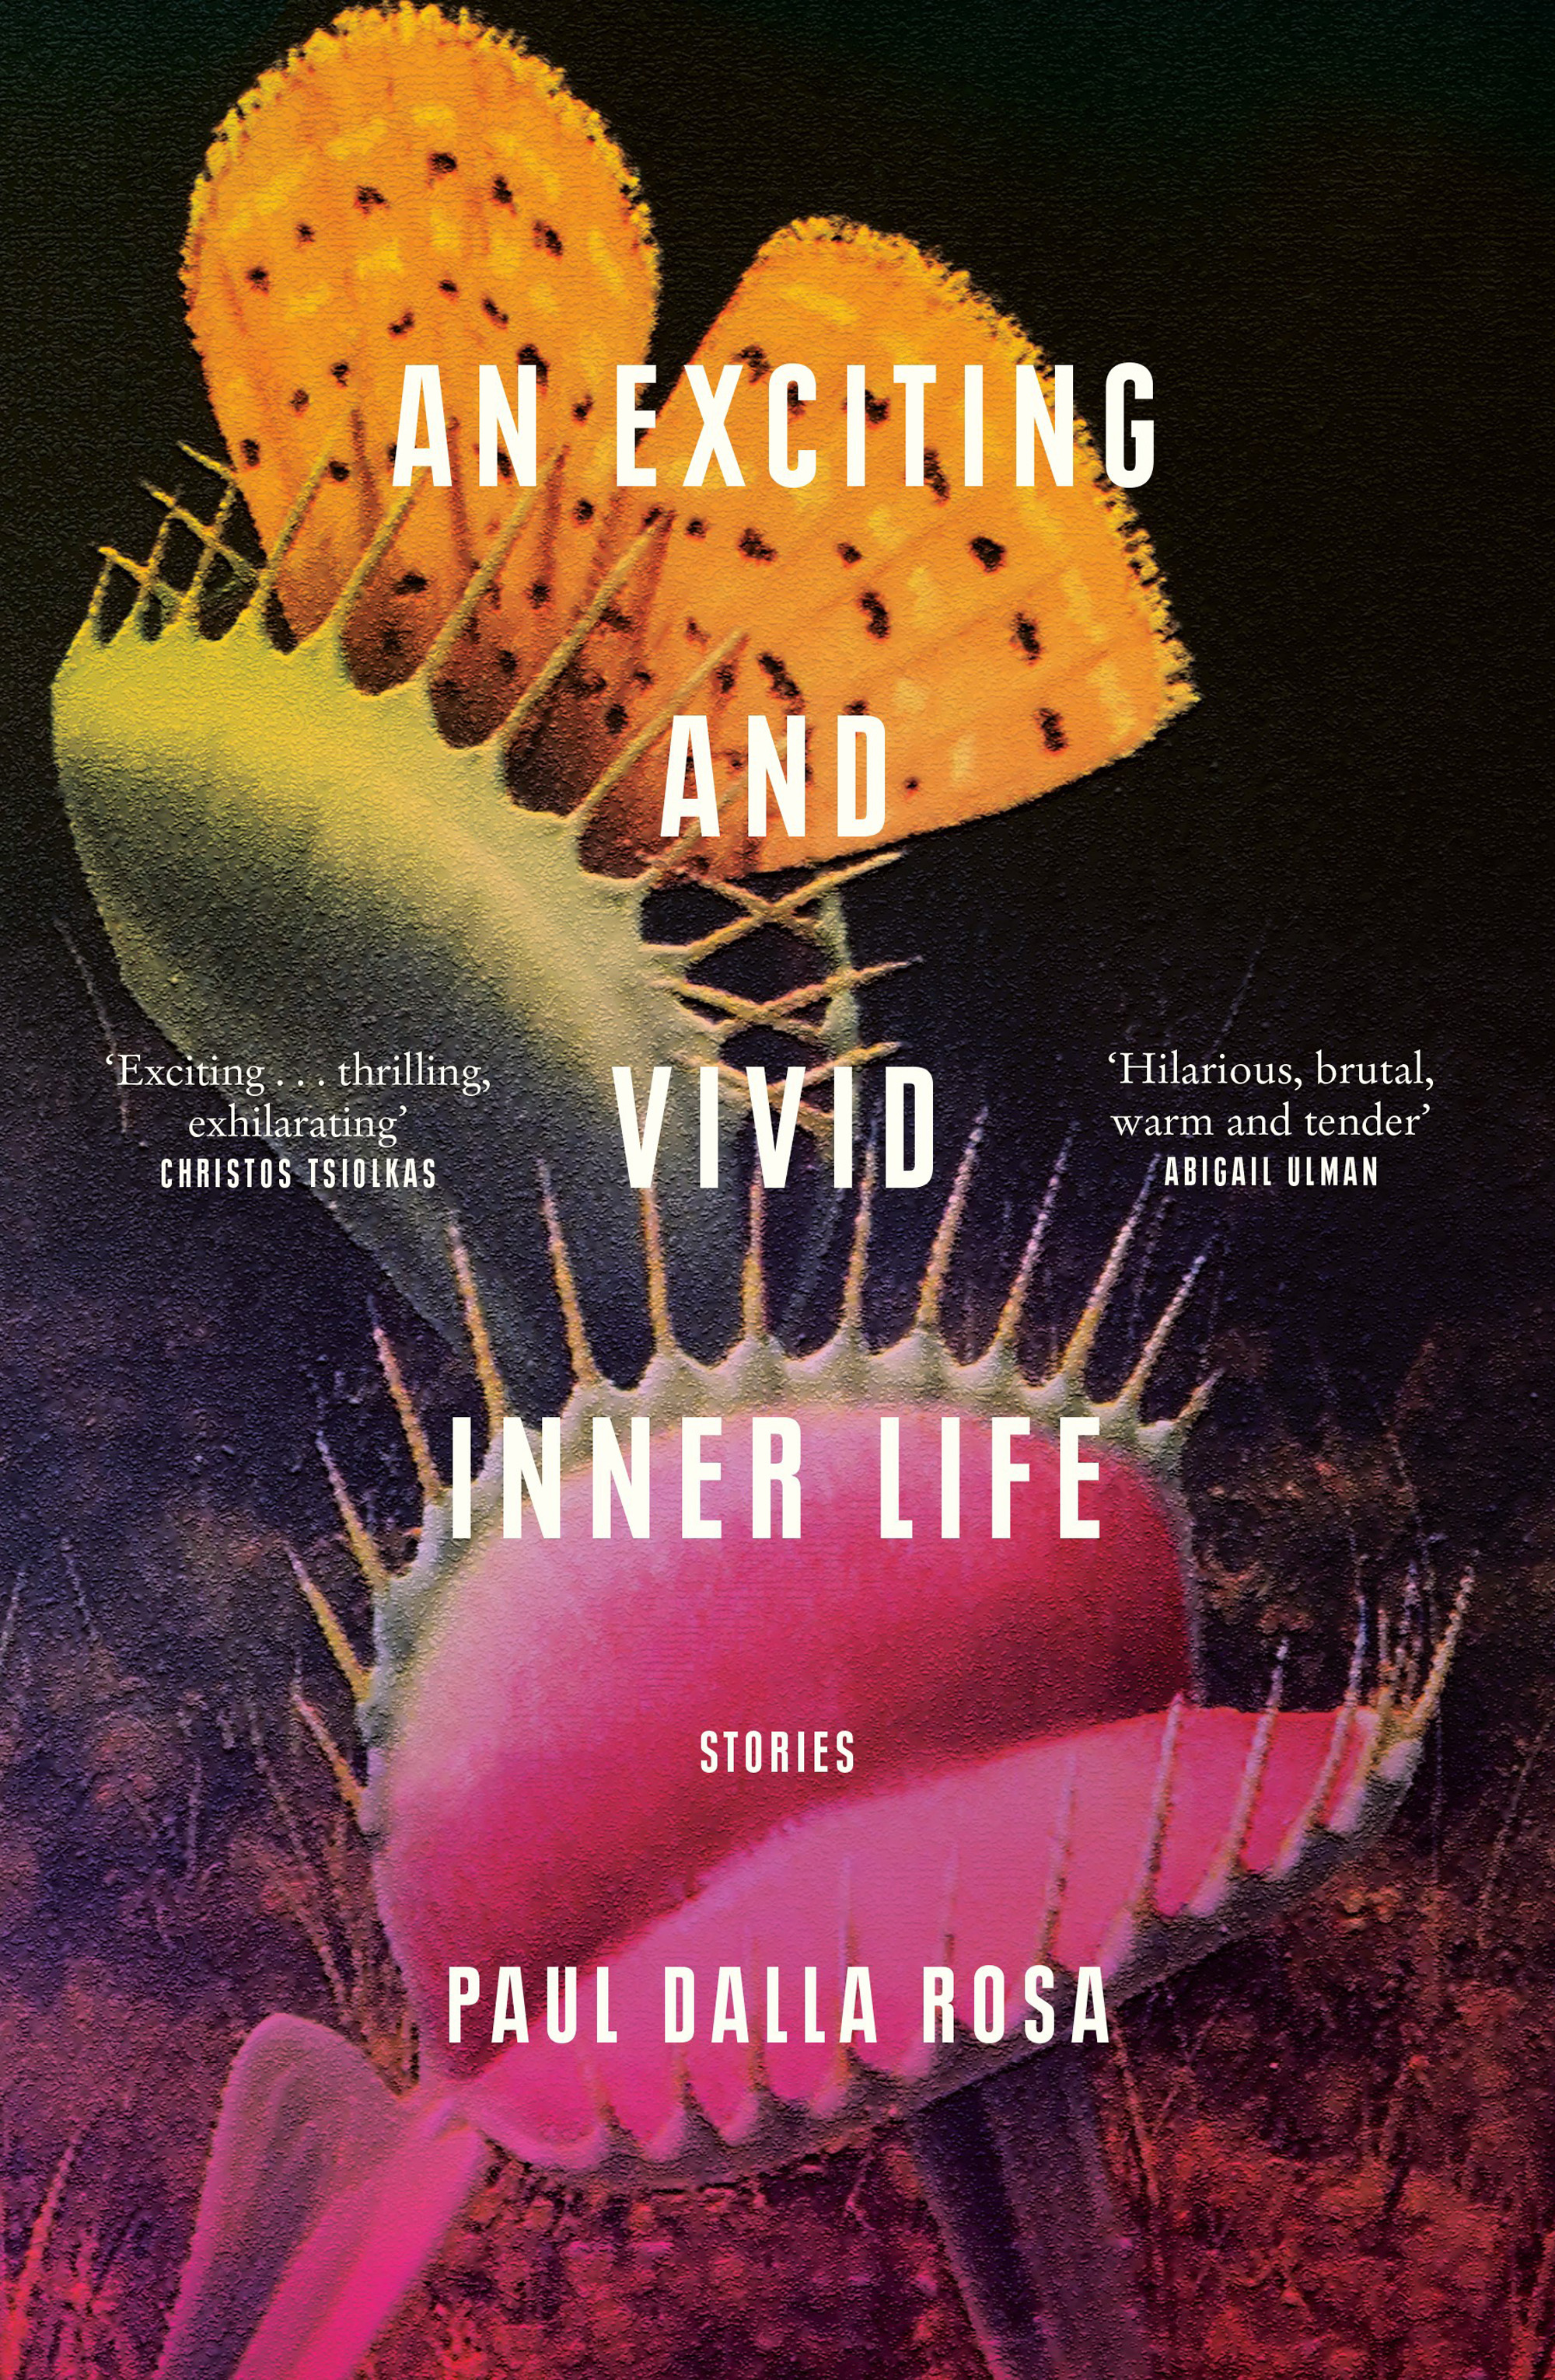 Cover of An Exciting and Vivid Inner Life by Paul Dalla Rosa featuring a venus flytrap